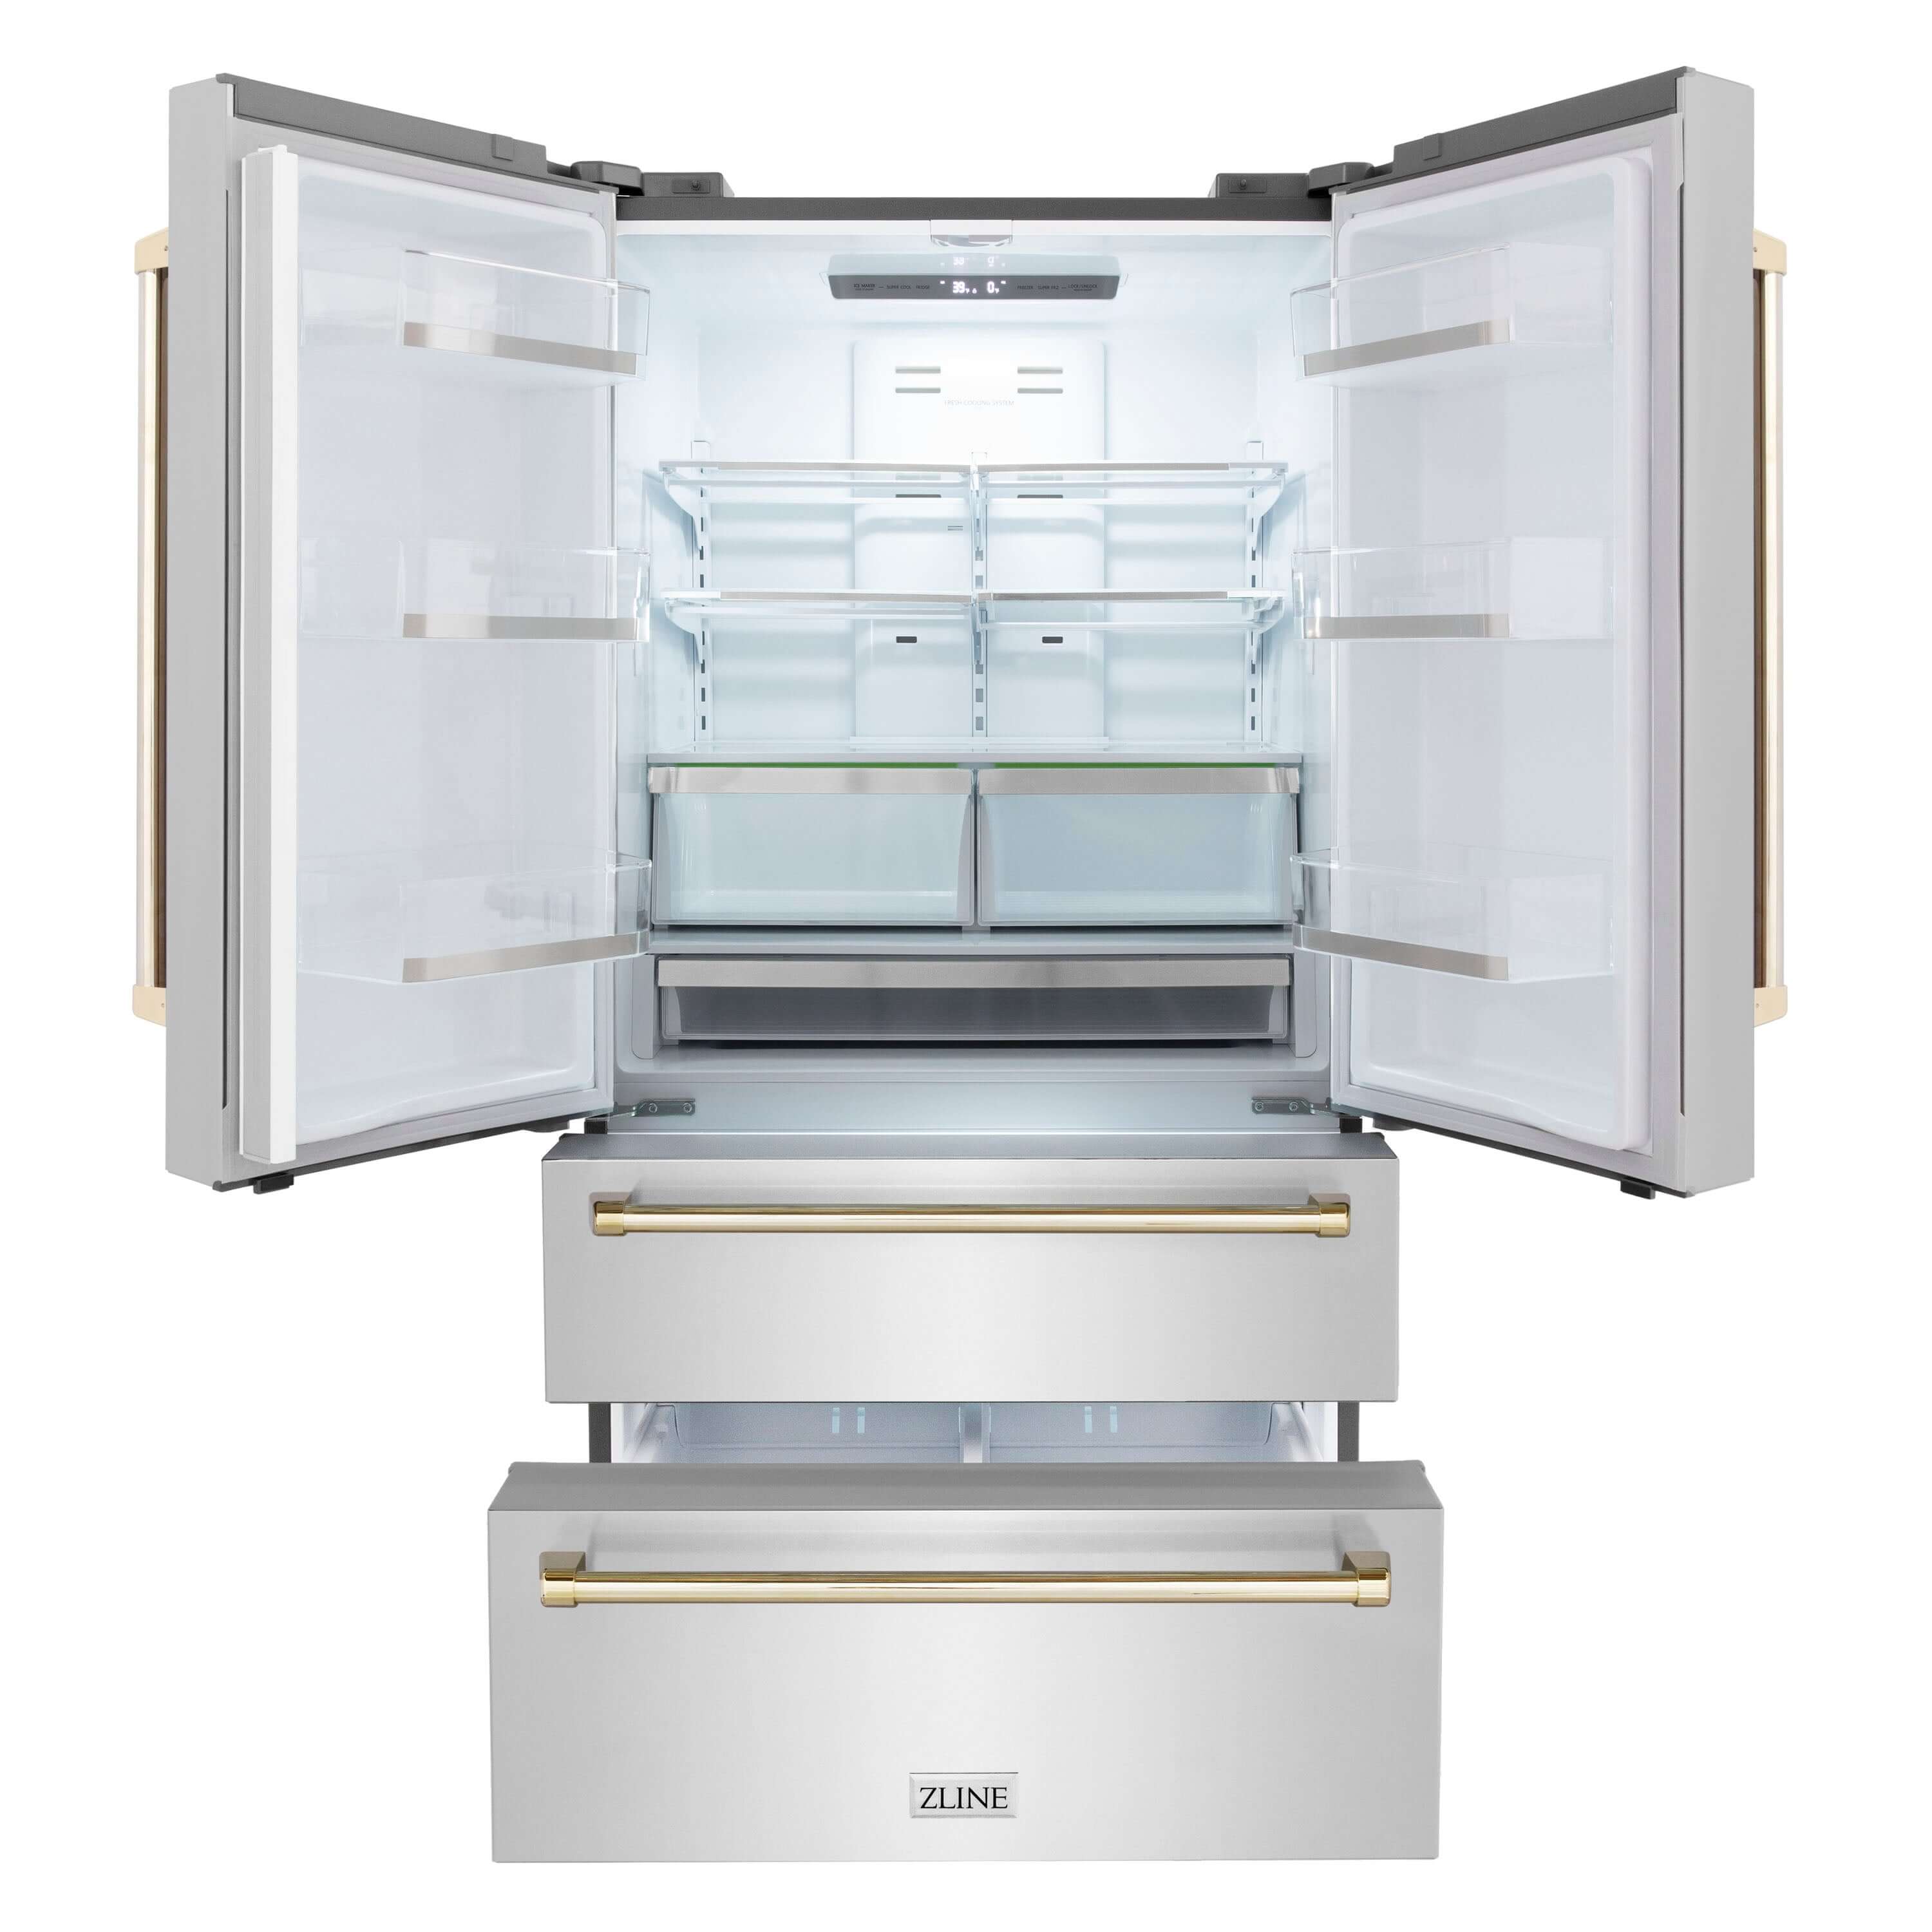 ZLINE Autograph Edition 36 in. 22.5 cu. ft Freestanding French Door Refrigerator with Ice Maker in Fingerprint Resistant Stainless Steel with Polished Gold Accents (RFMZ-36-G) front, refrigeration compartment and bottom freezers open.